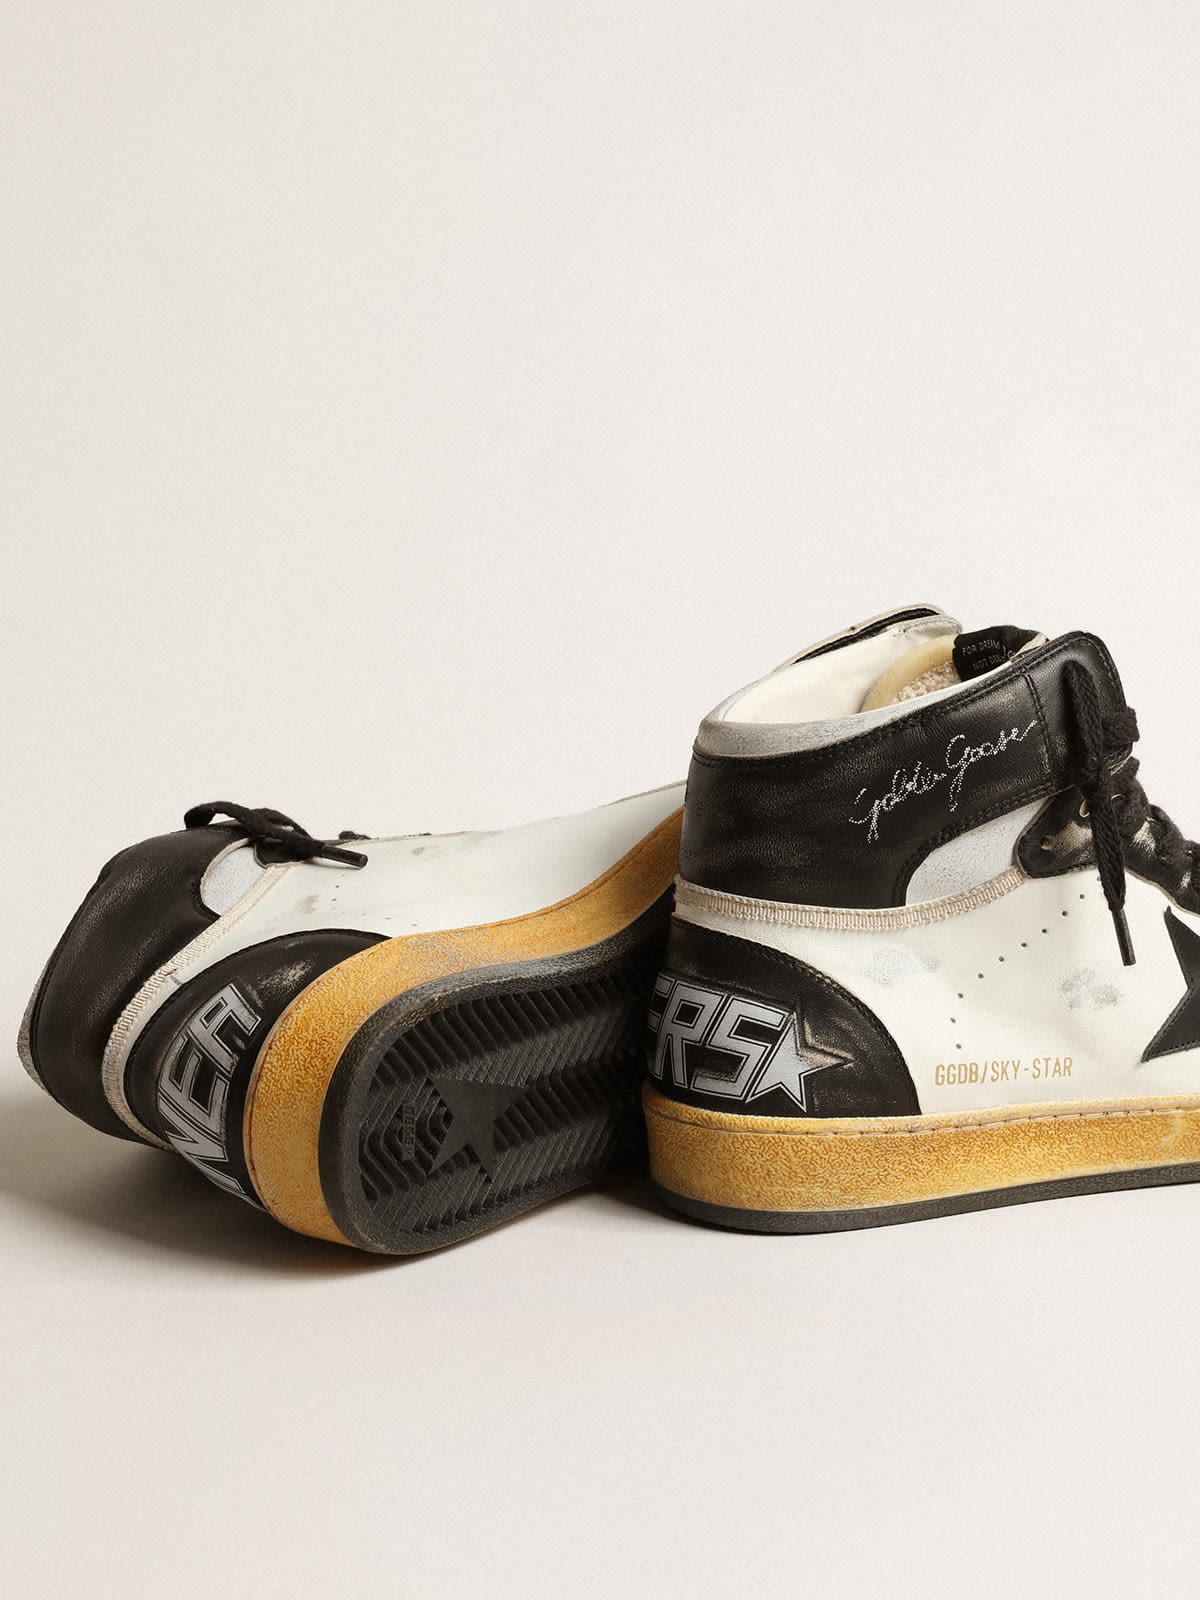 Sky-Star in white nappa leather with black leather star - 3